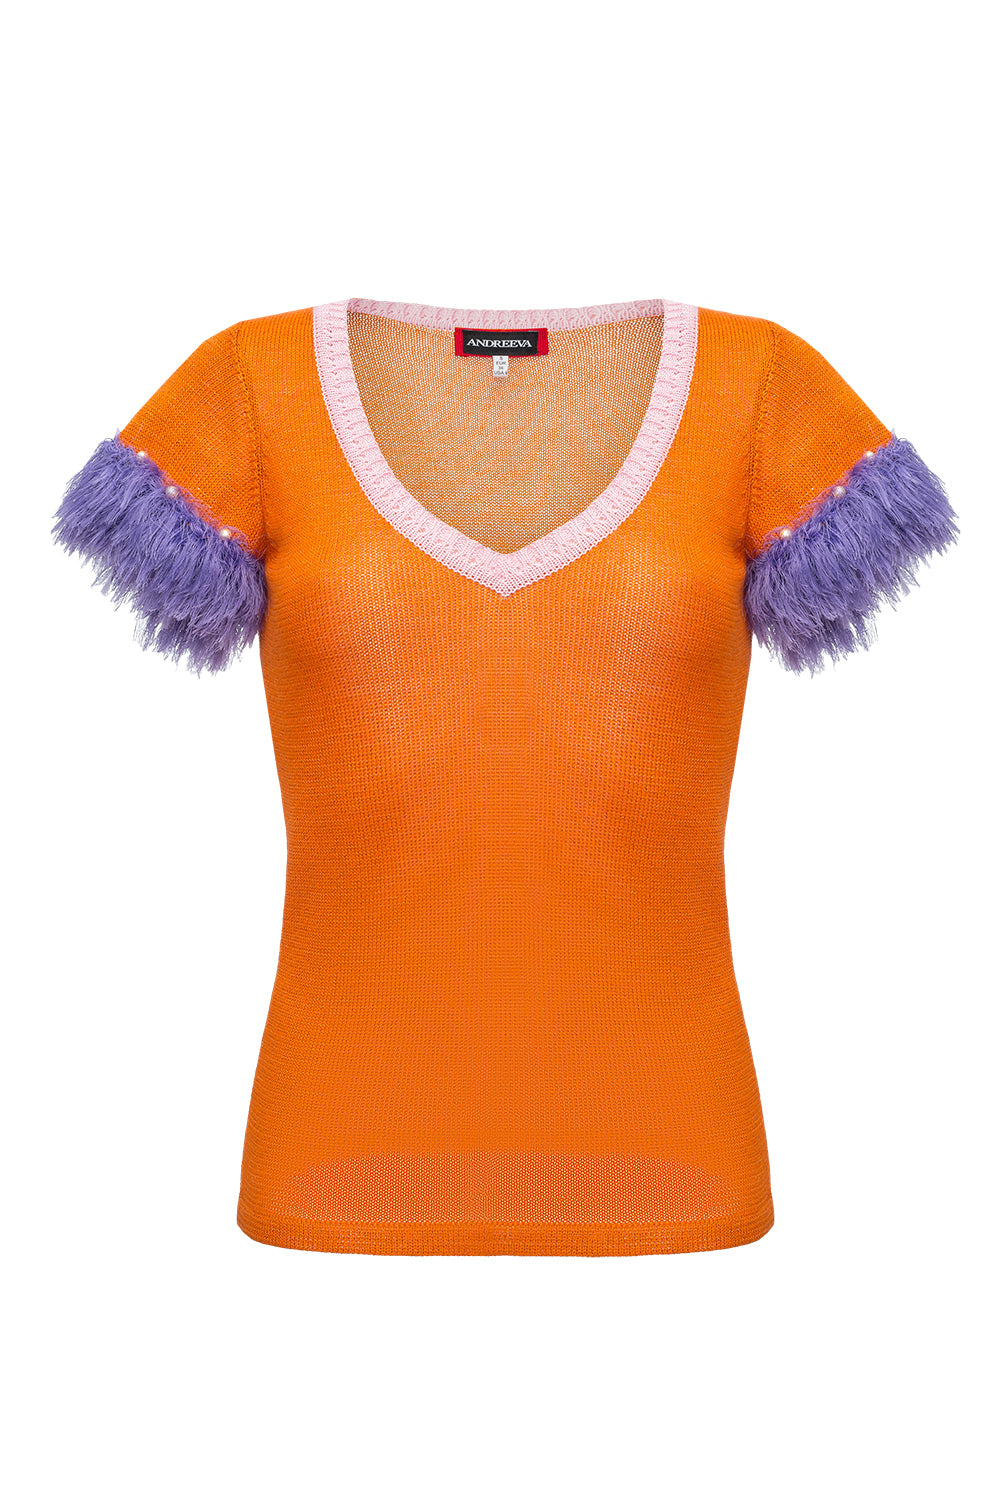 Women’s Yellow / Orange Golden Poppy Knit Top With Handmade Knit Details Extra Large Andreeva